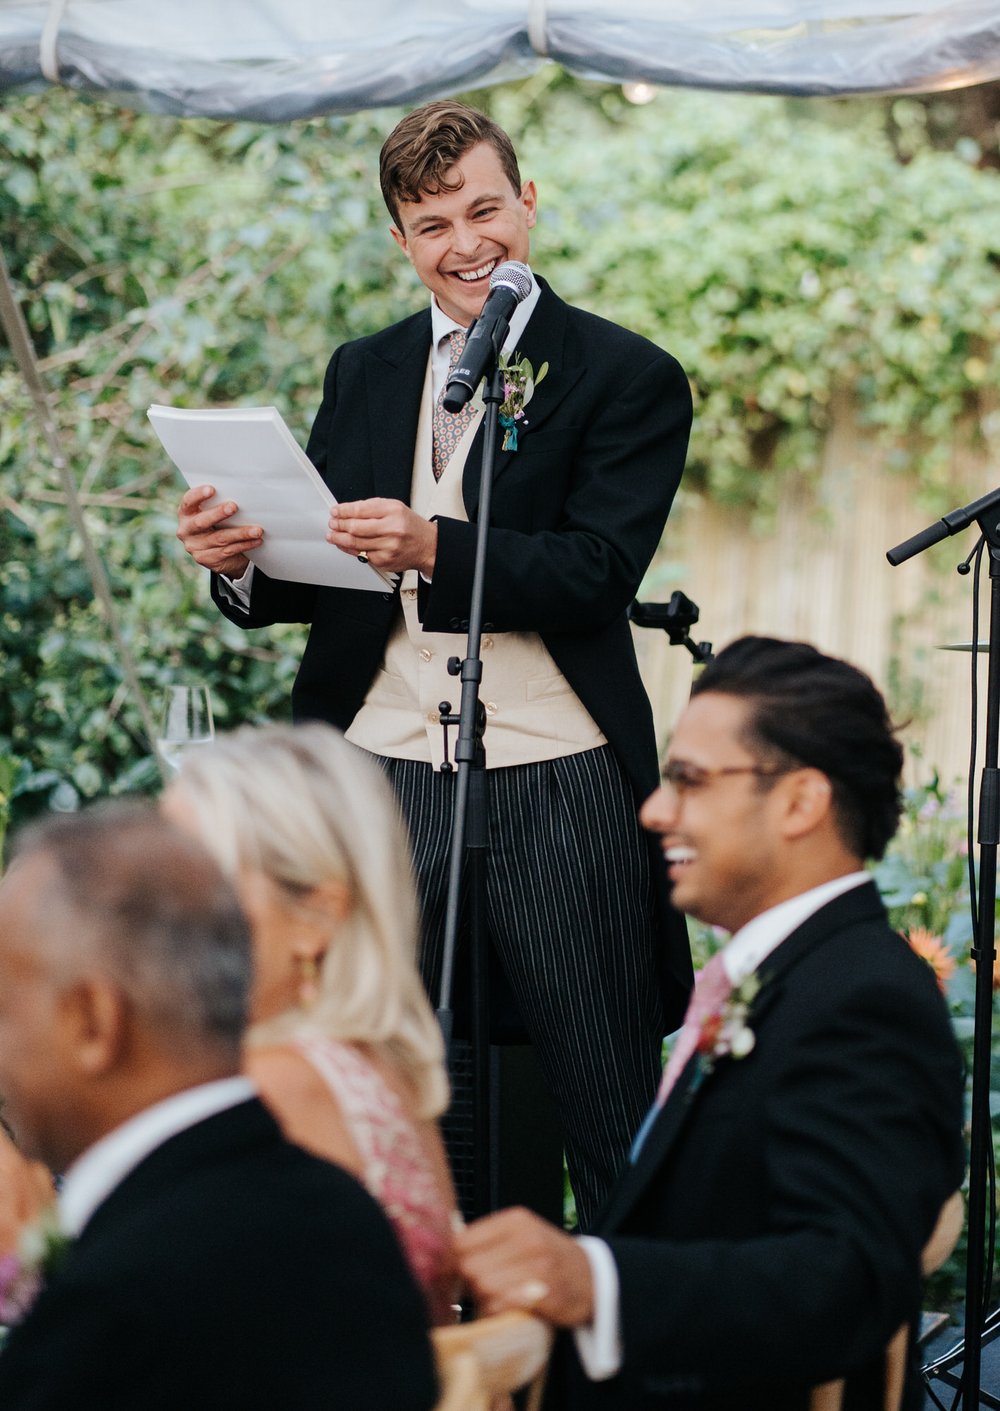 Groom smirks as he delivers passionate wedding speech inside marquee